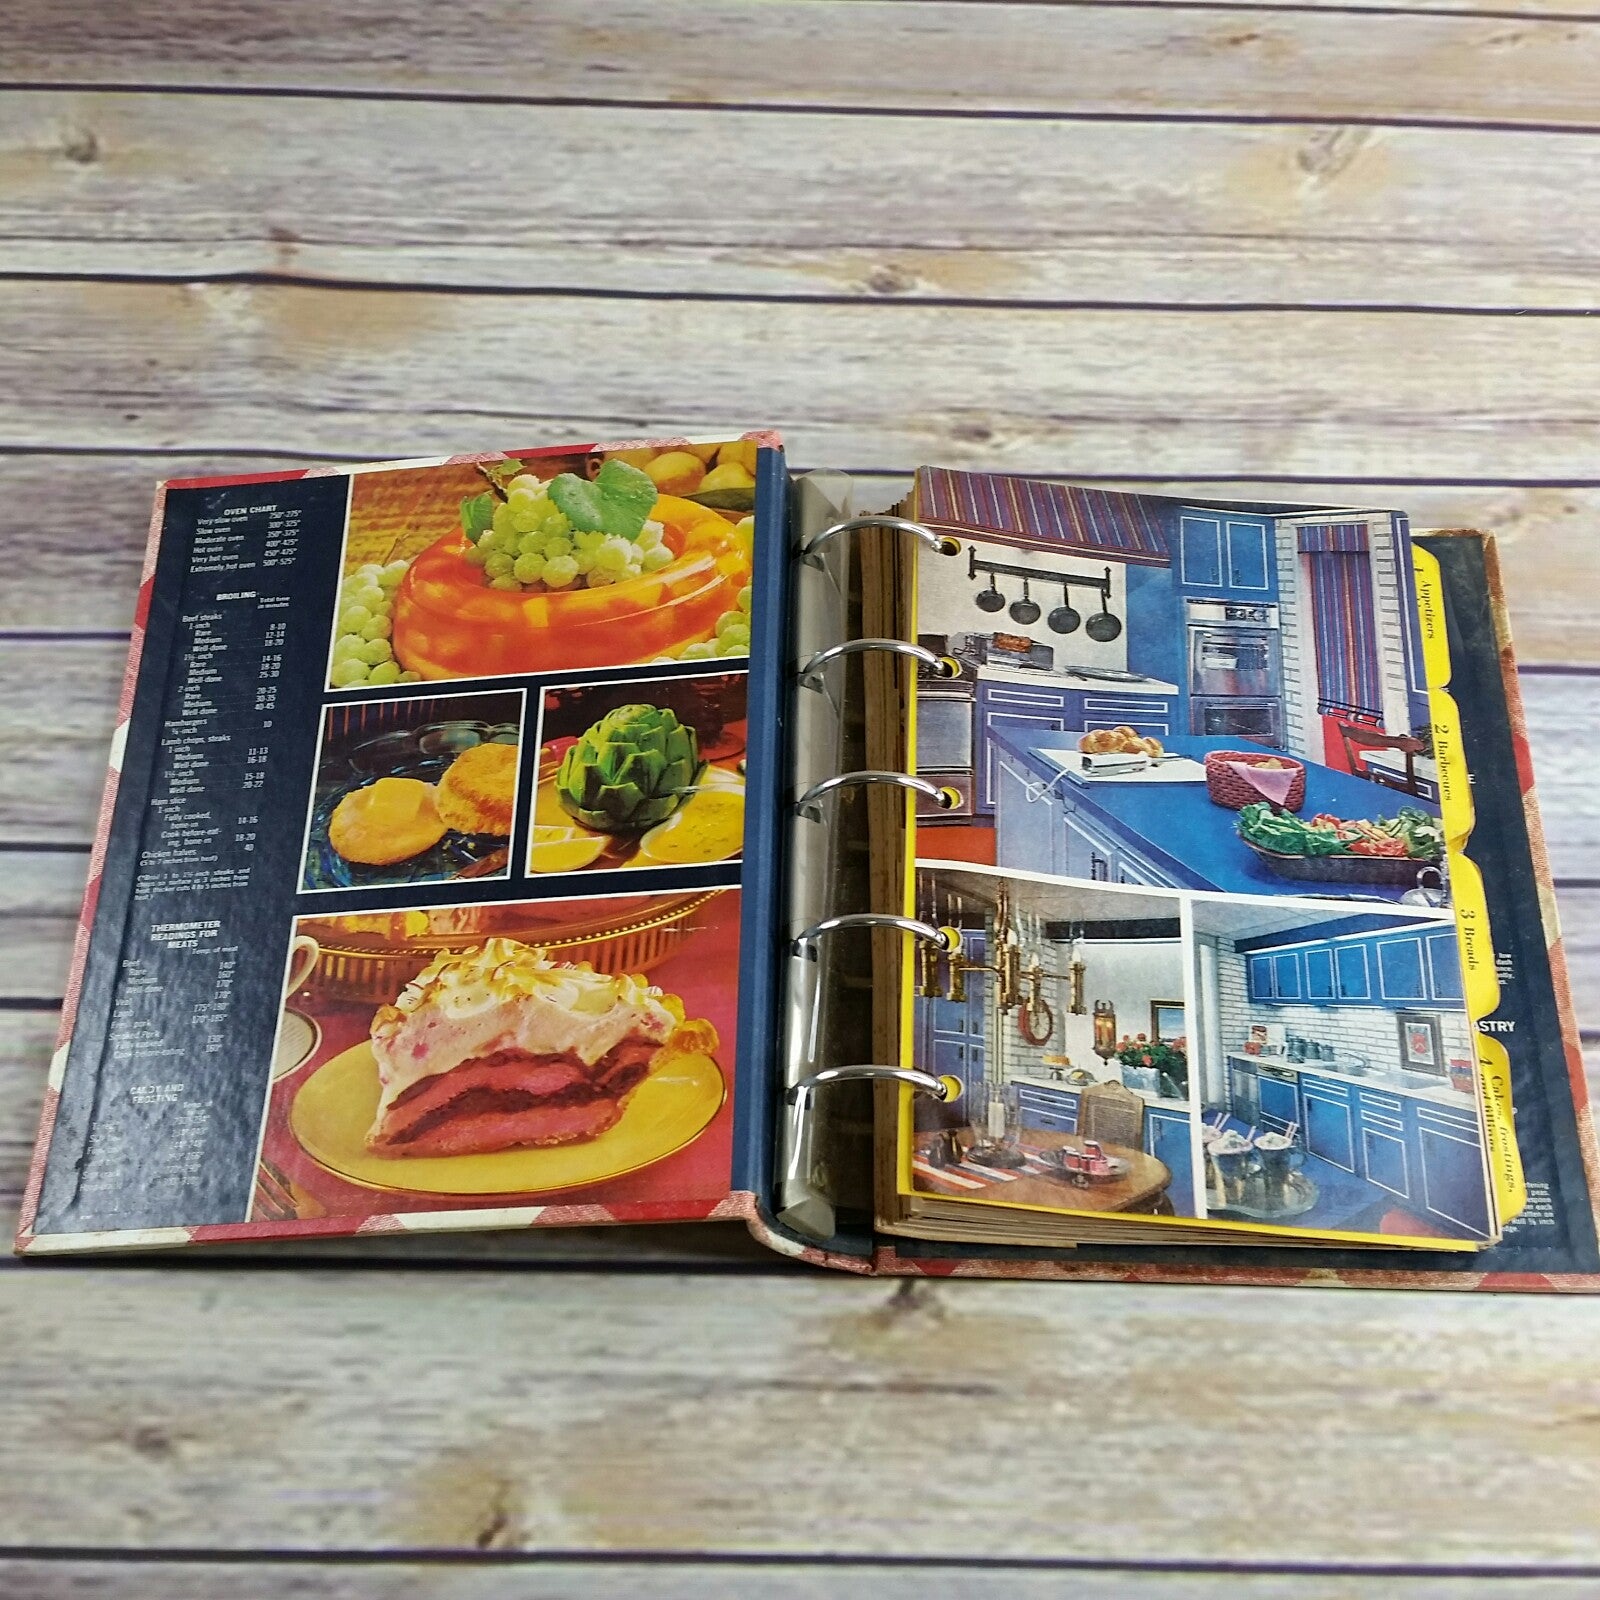 Vintage Better Homes and Gardens New Cookbook Recipes 5 Ring Binder Hardcover 1970s - At Grandma's Table